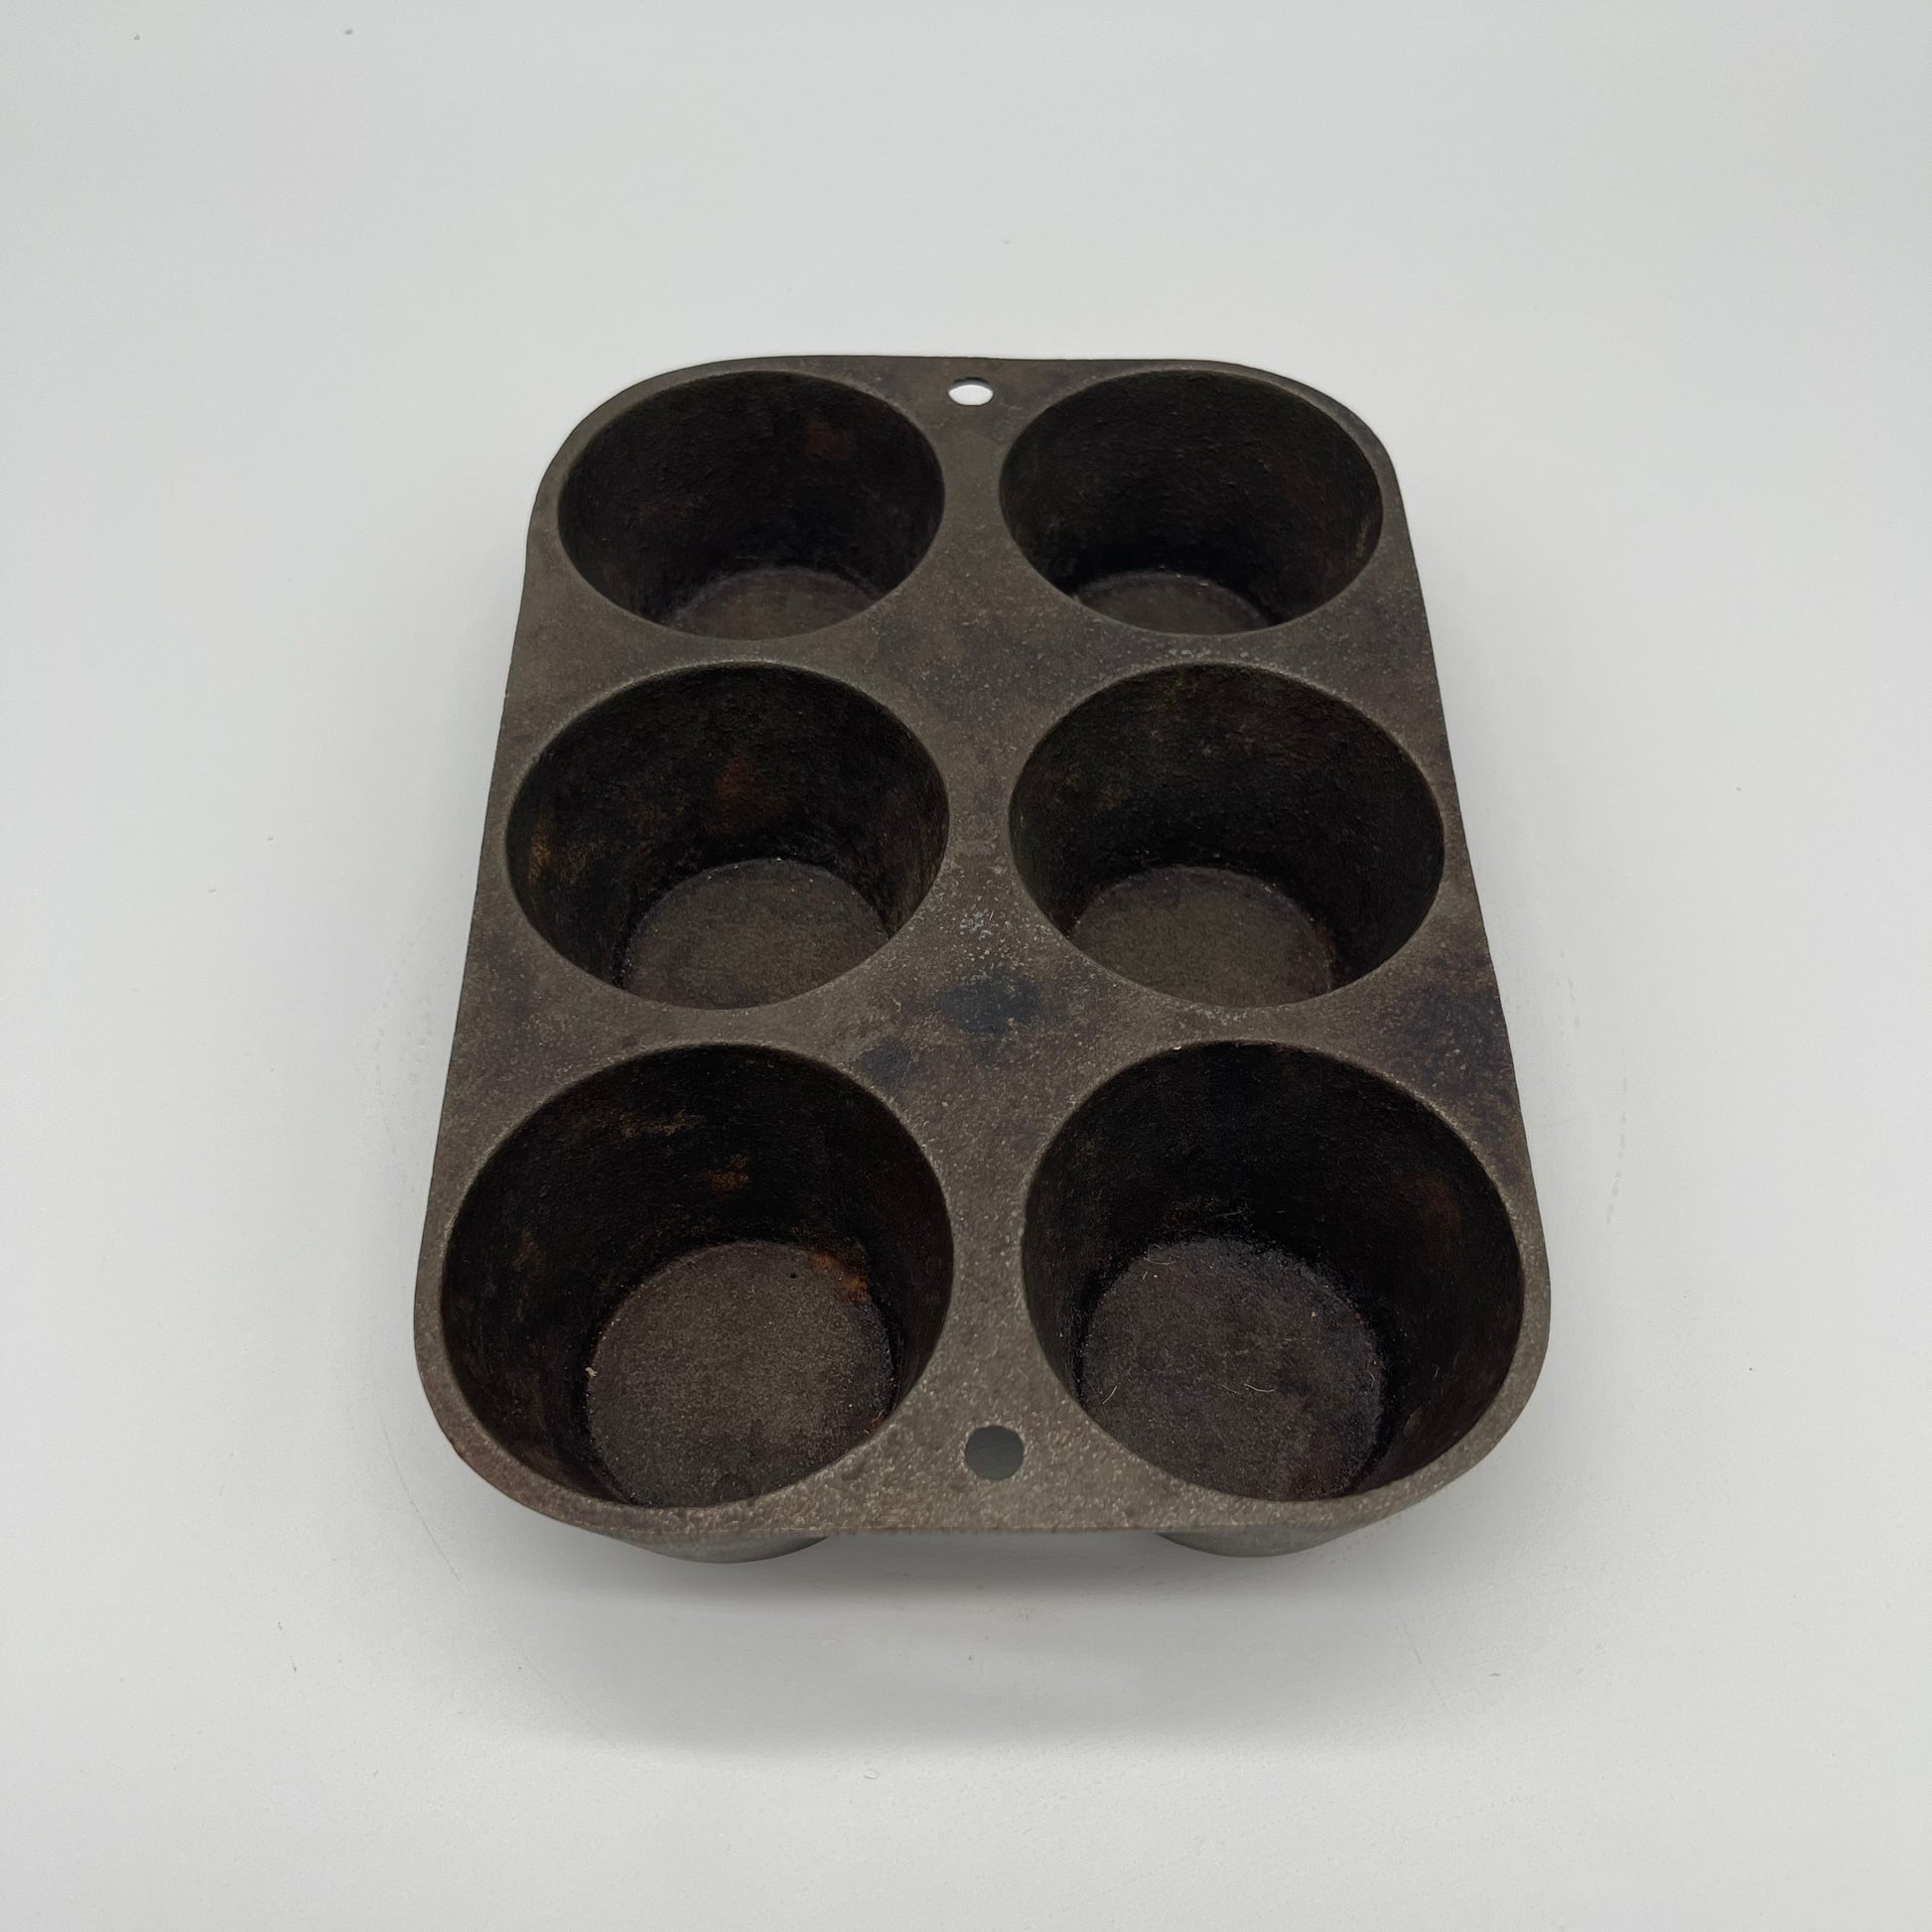 Cast Iron Muffin Pan (Item Number 0170)